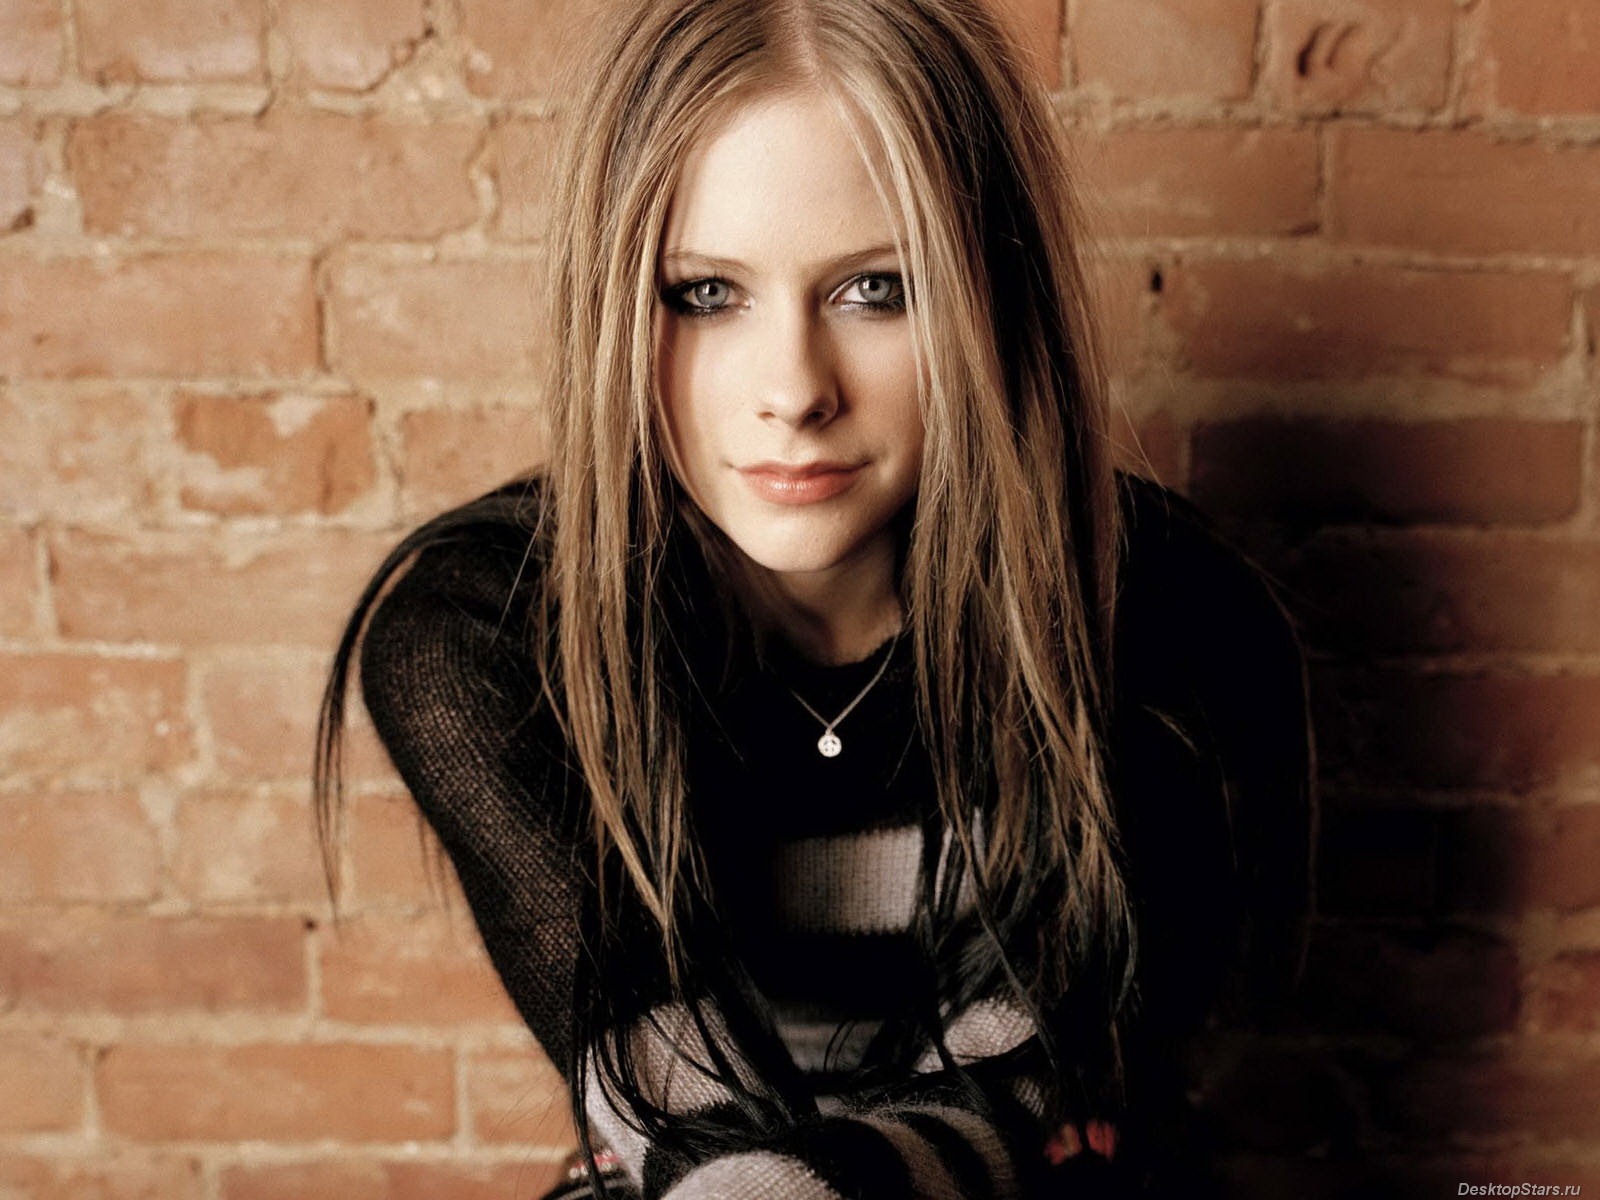 Avril Lavigne #016 - 1600x1200 Wallpapers Pictures Photos Images